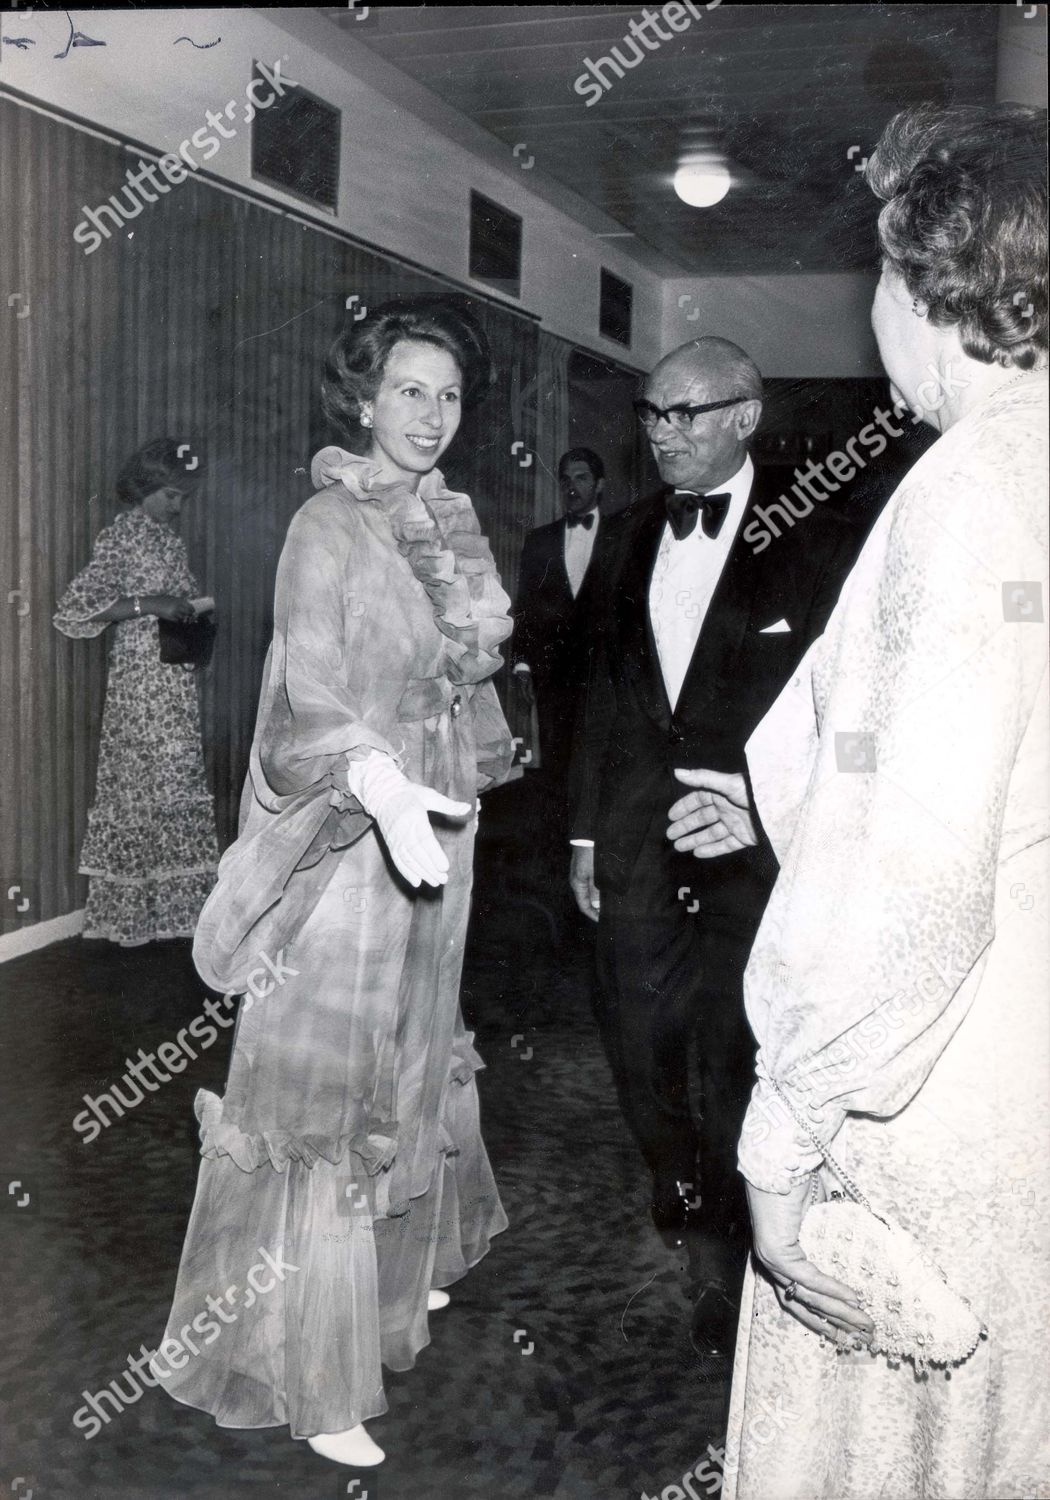 princess-anne-now-princess-royal-1977-picture-shows-princess-anne-arriving-at-the-royal-festival-hall-london-to-attend-a-jubilee-jazz-jamboree-shutterstock-editorial-891781a.jpg